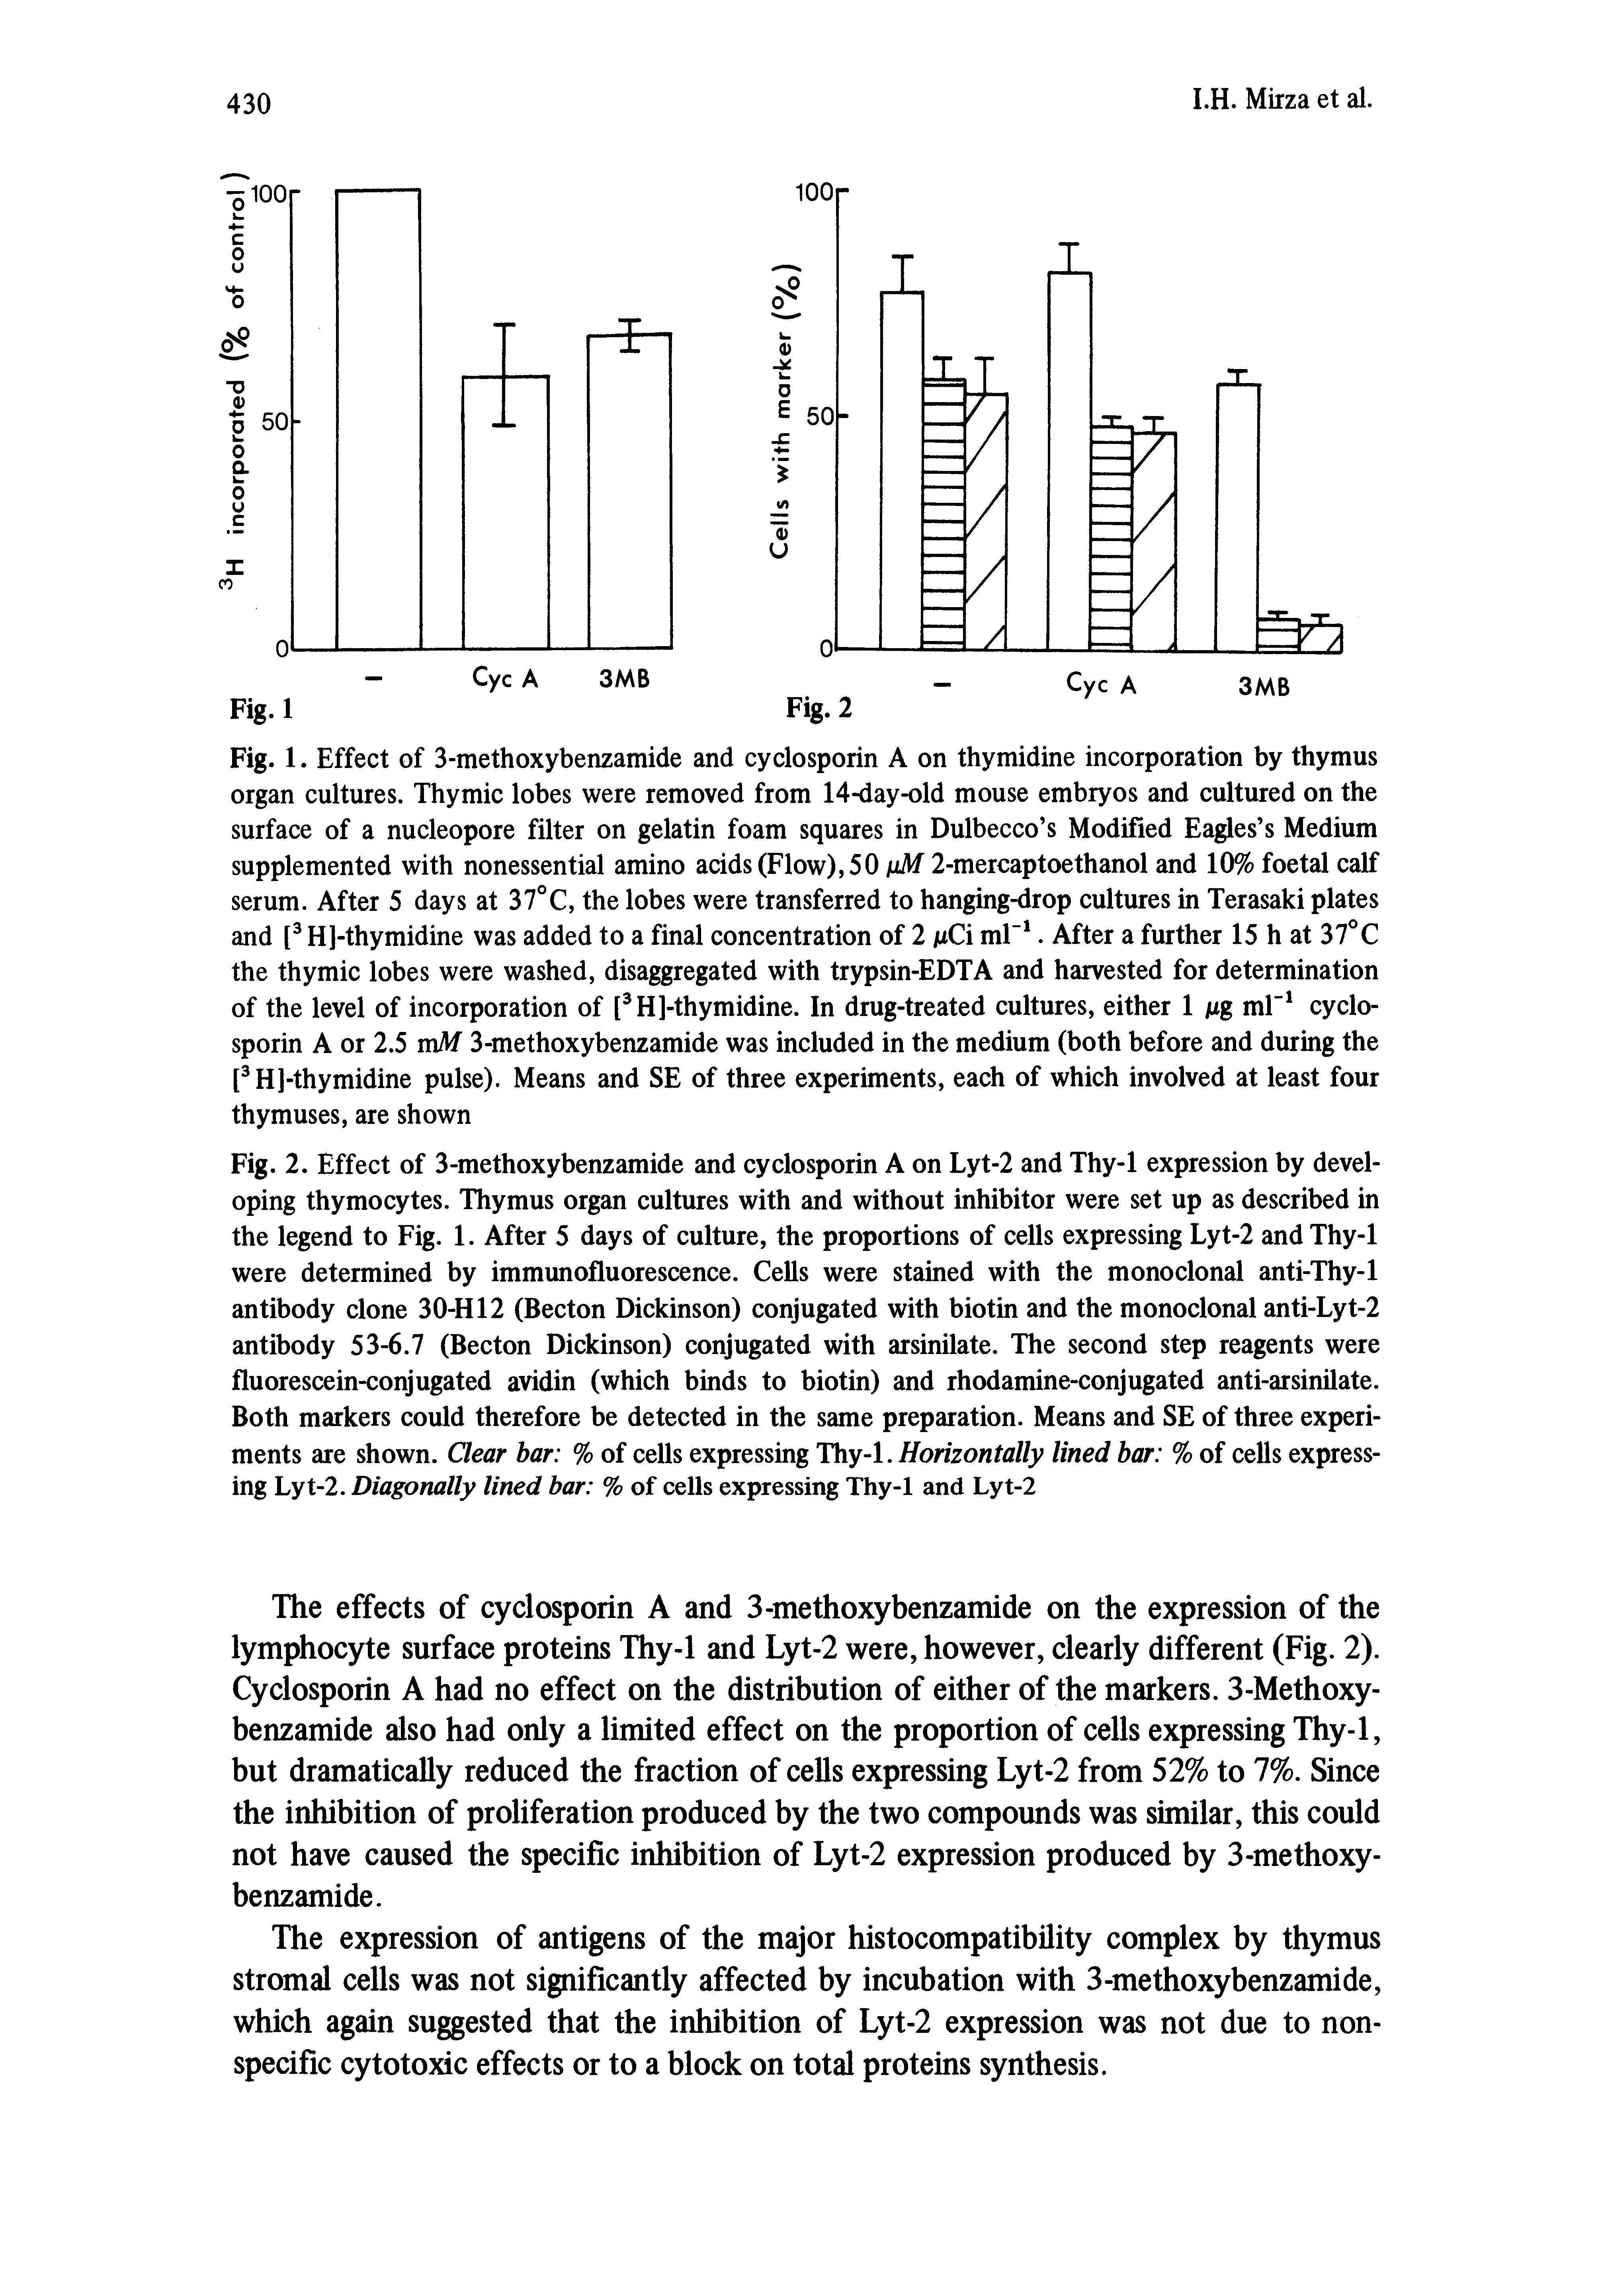 Fig. 1. Effect of 3-methoxybenzamide and cyclosporin A on thymidine incorporation by thymus organ cultures. Thymic lobes were removed from 14-day-old mouse embryos and cultured on the surface of a nucleopore filter on gelatin foam squares in Dulbecco s Modified Eagles s Medium supplemented with nonessential amino acids (Flow), 50 iM 2-mercaptoethanol and 10% foetal calf serum. After 5 days at 37°C, the lobes were transferred to hanging-drop cultures in Terasaki plates and H]-thymidine was added to a final concentration of 2 juCi ml. After a further 15 h at 37°C the thymic lobes were washed, disaggregated with trypsin-EDTA and harvested for determination of the level of incorporation of [ H]-thymidine. In drug-treated cultures, either 1 jug nil cyclosporin A or 2.5 mM 3-methoxybenzamide was included in the medium (both before and during the [ H]-thymidine pulse). Means and SE of three experiments, each of which involved at least four thymuses, are shown...